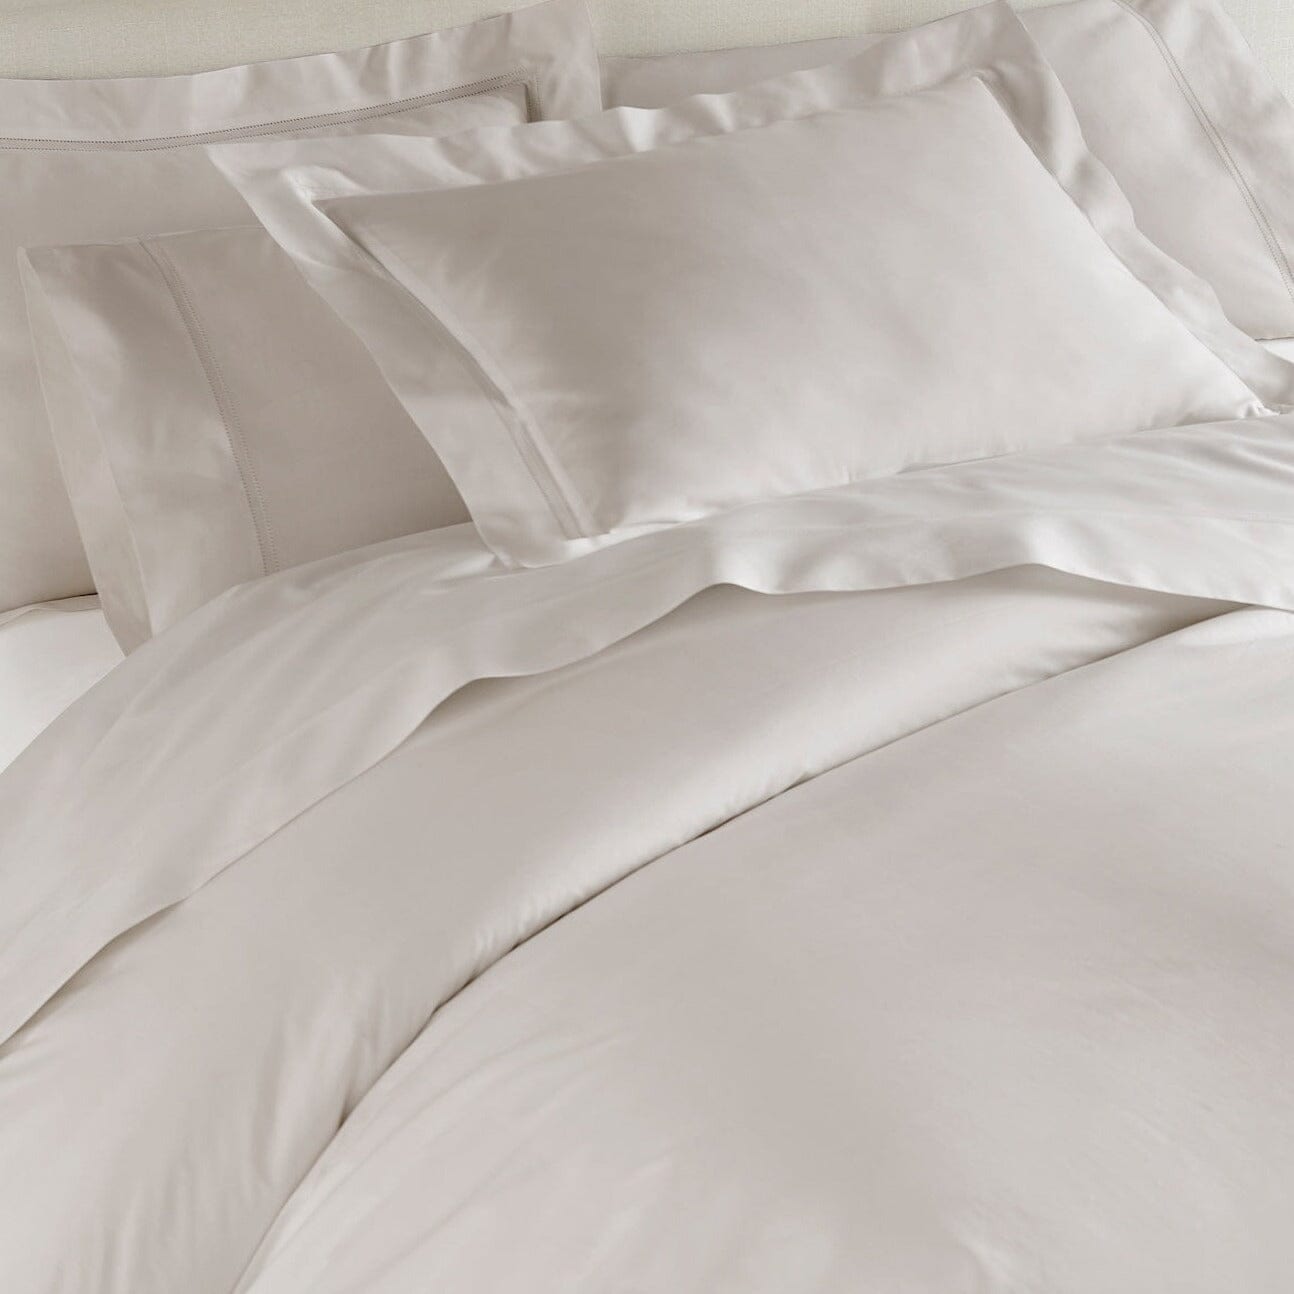 Peacock Alley Percale Cotton Bedding | Lyric Platinum at Fig Linens and Home